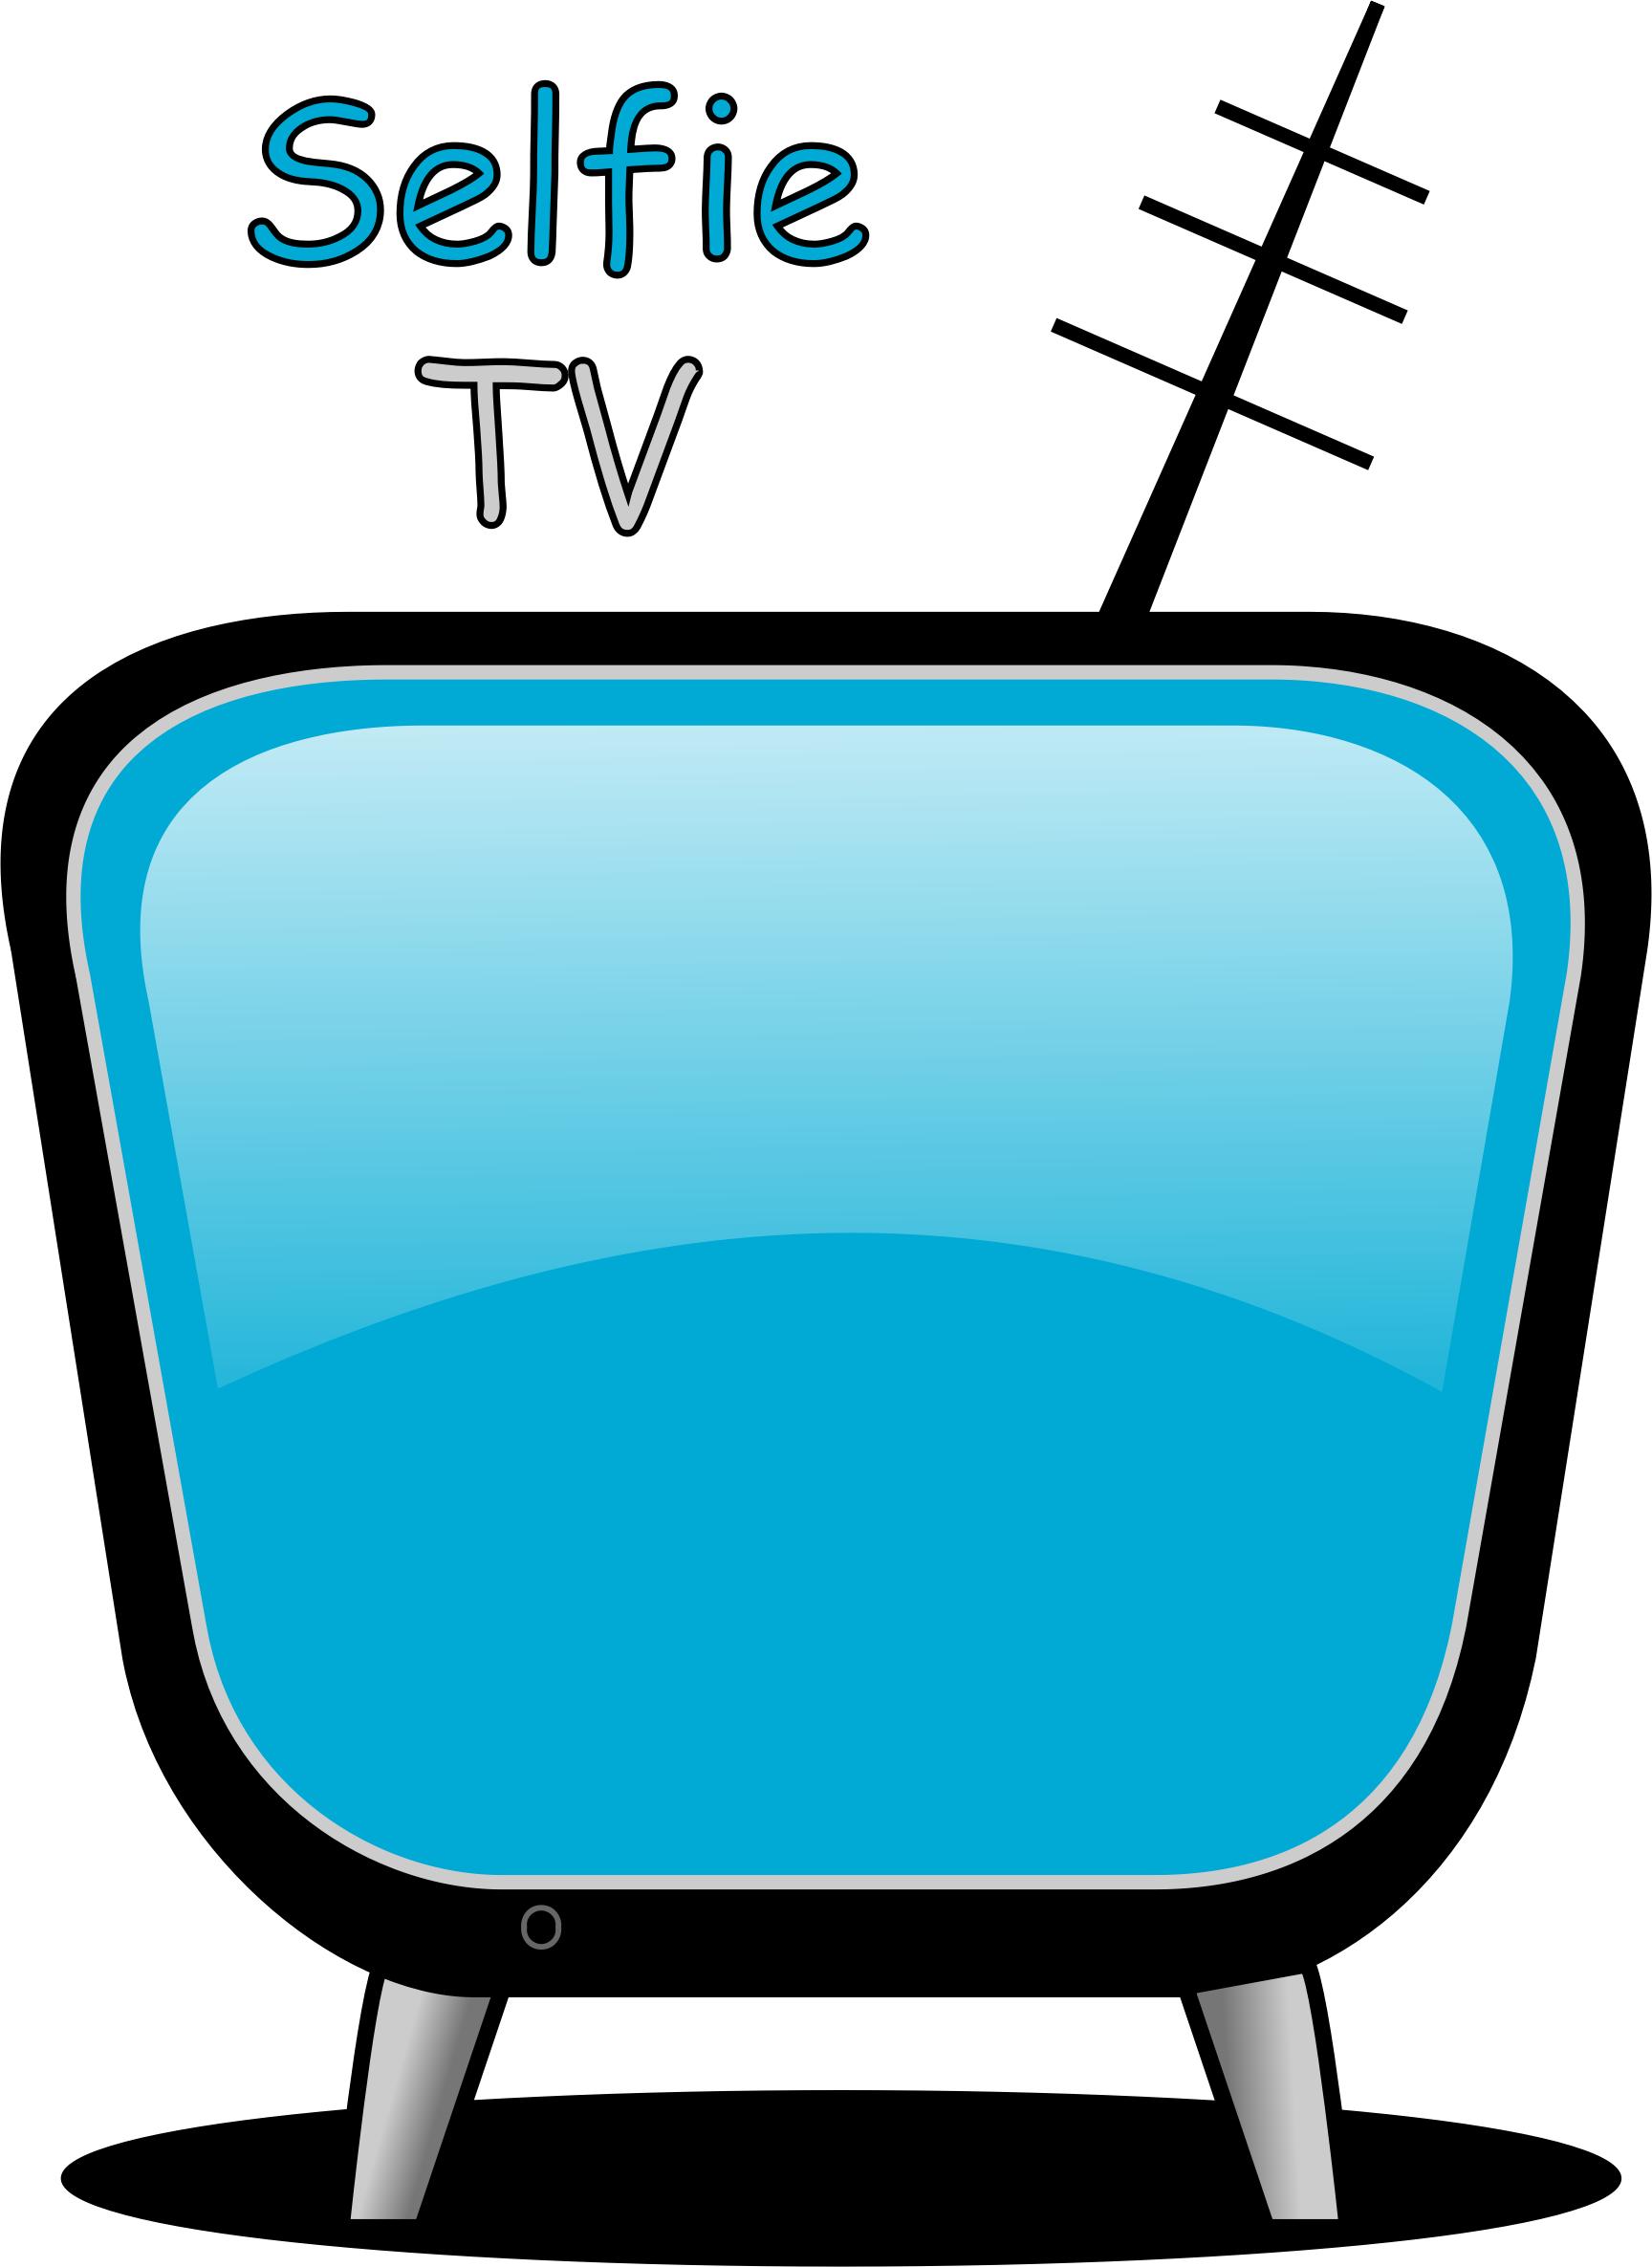 Selfie TV PNG icons